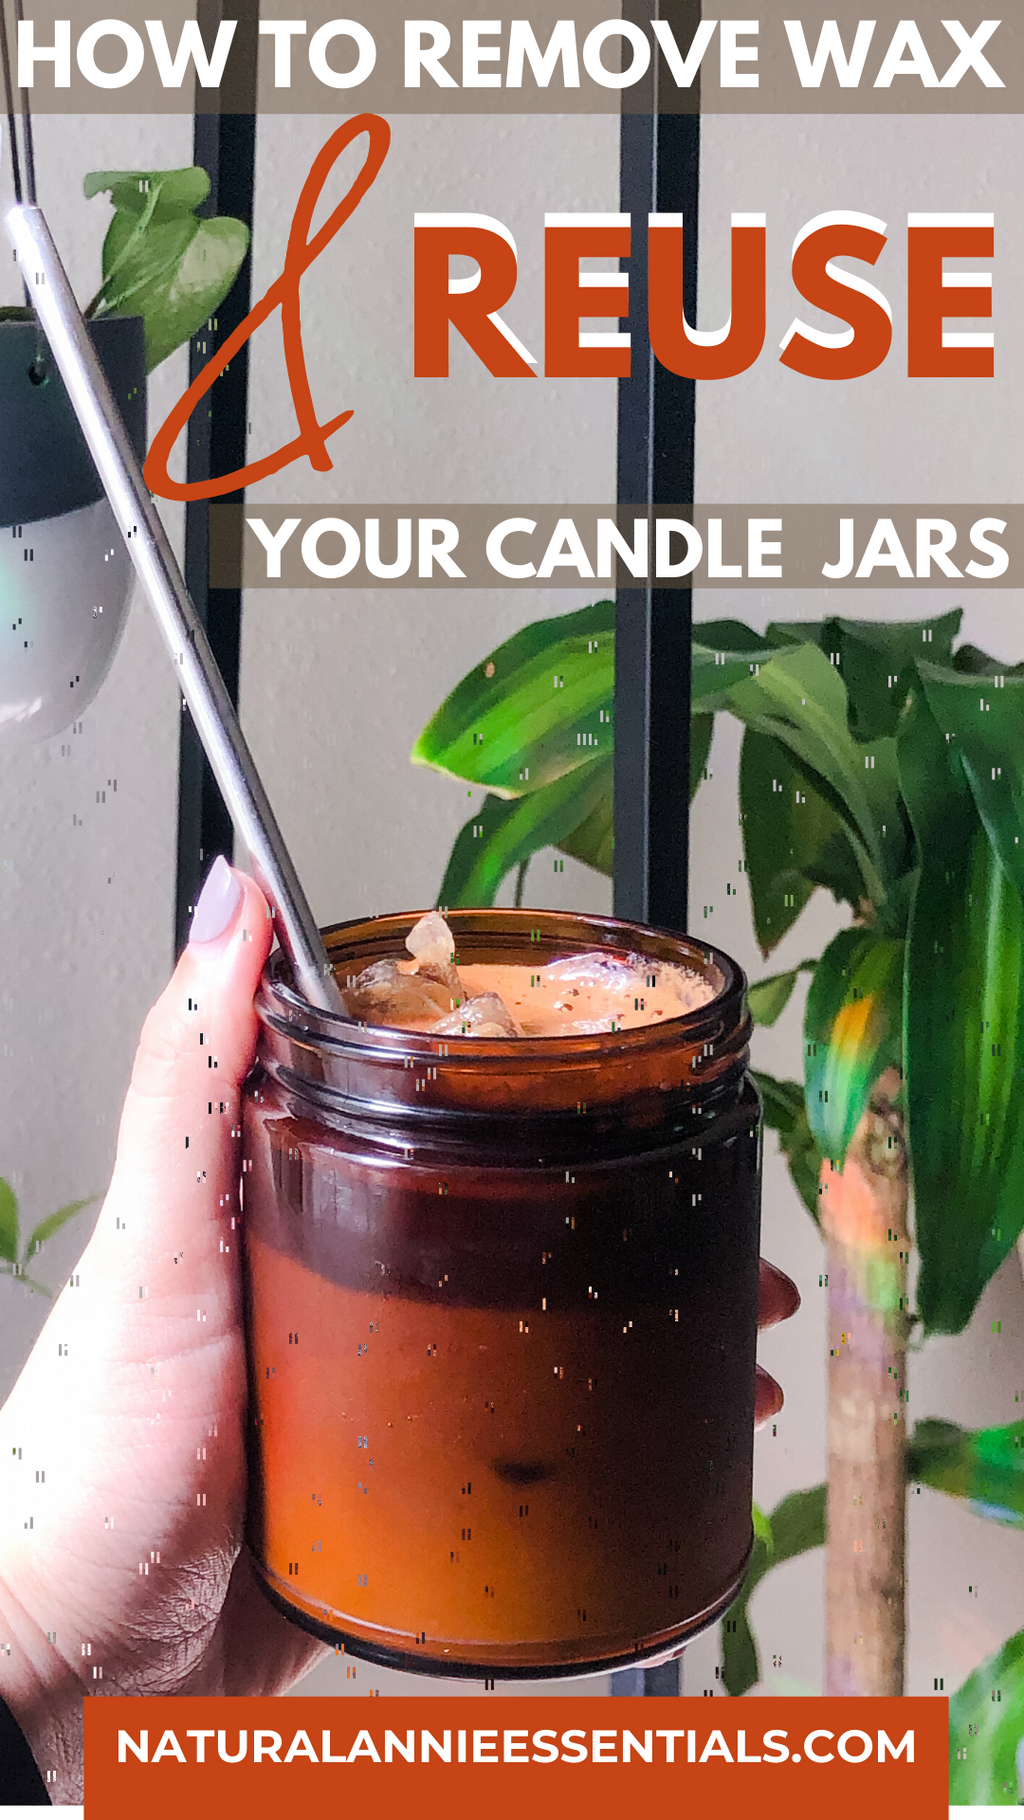 How to reuse candle wax and jars – The Waste Management & Recycling Blog